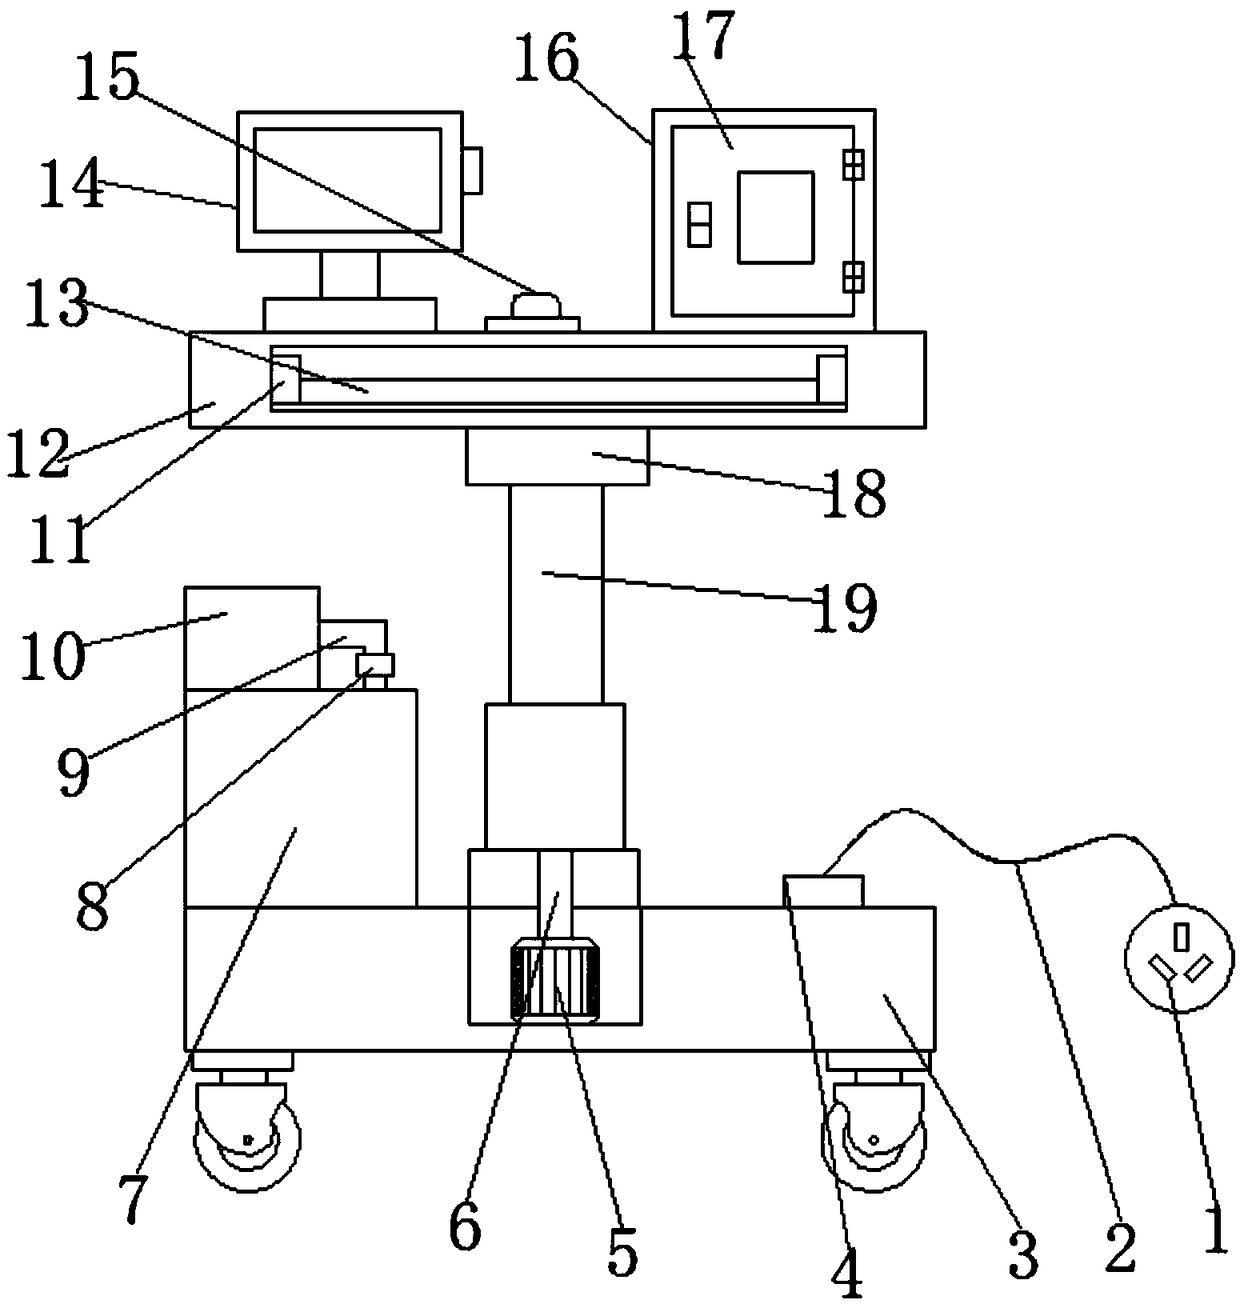 Height adjustable medical image viewing device